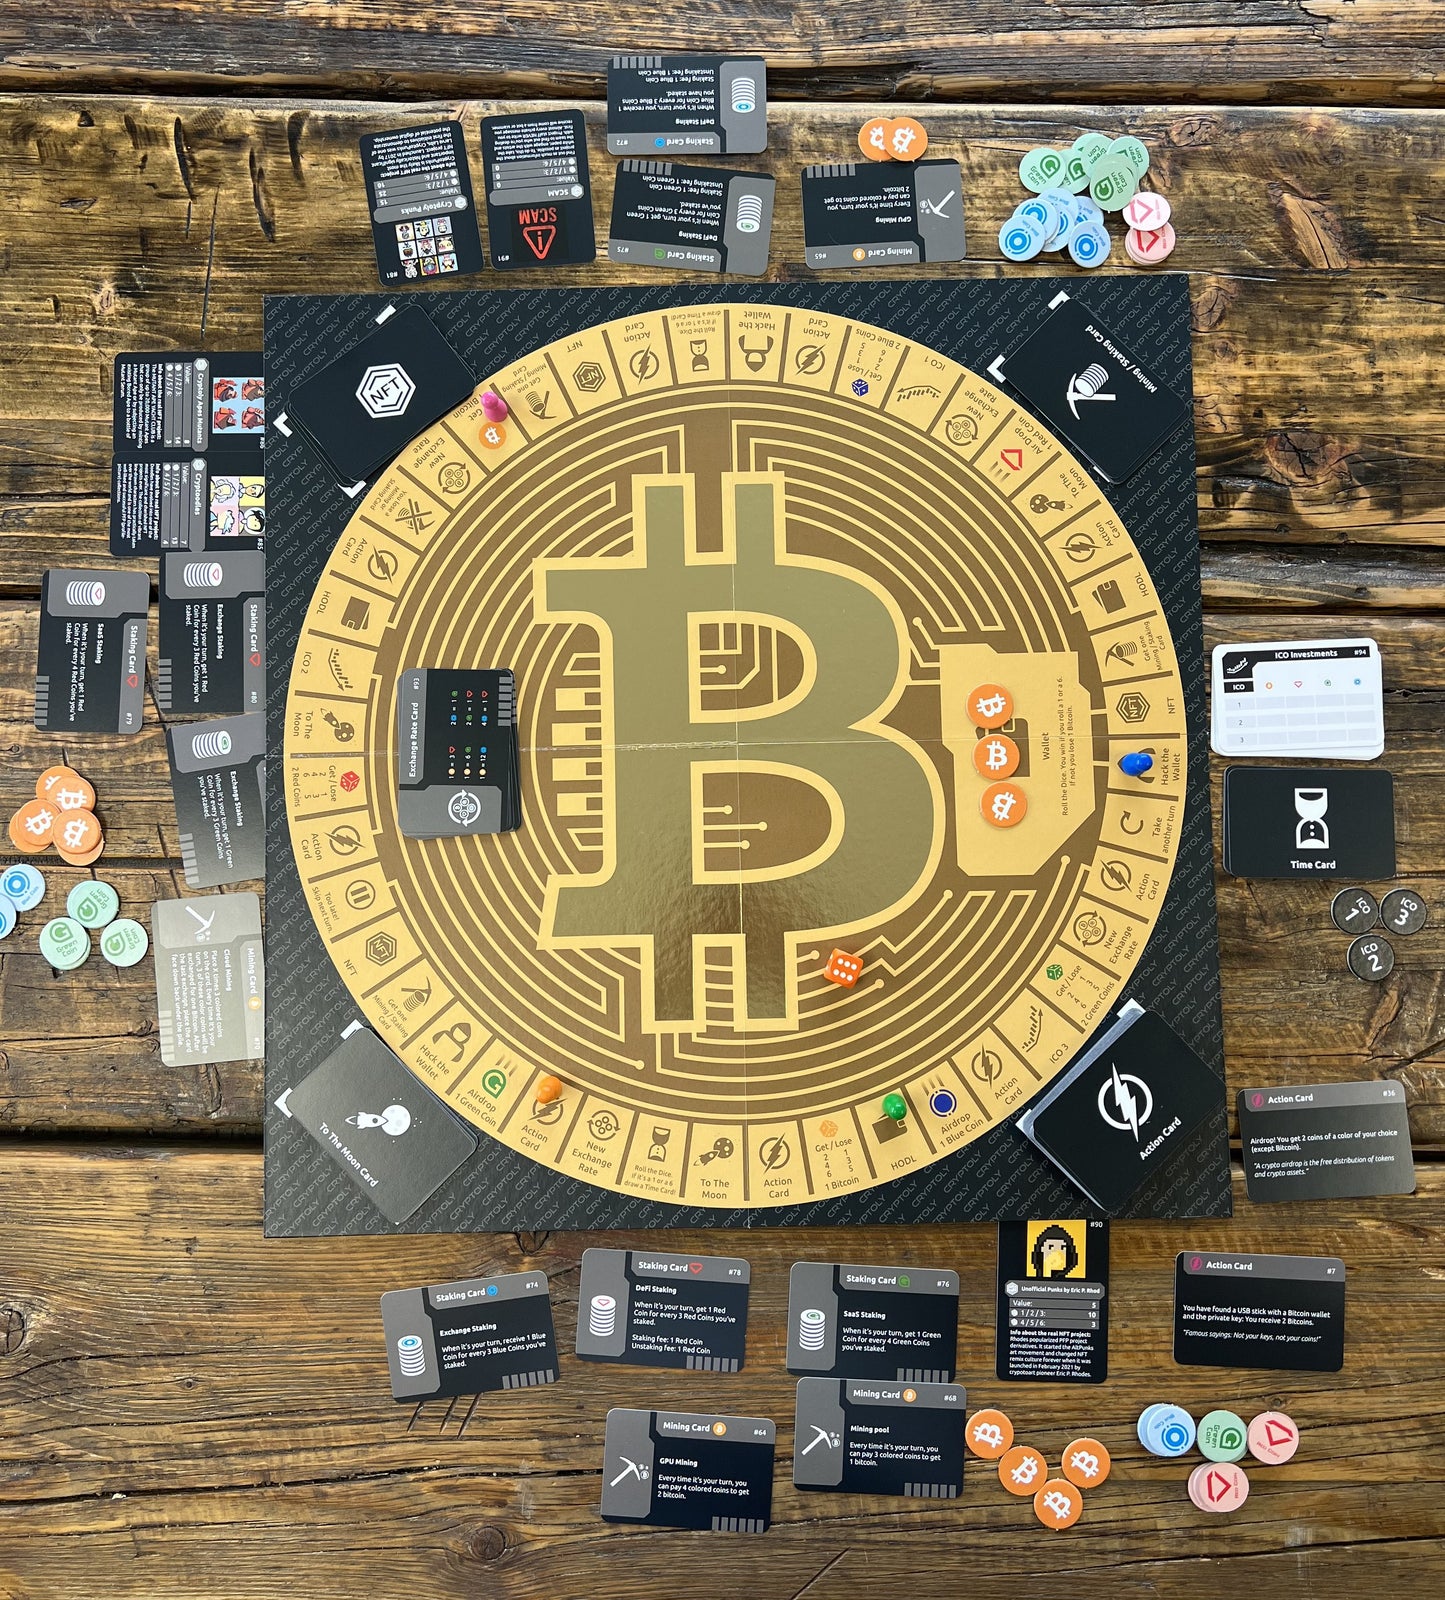 CRYPTOLY - To The Moon And Beyond / The multilingual Bitcoin board game